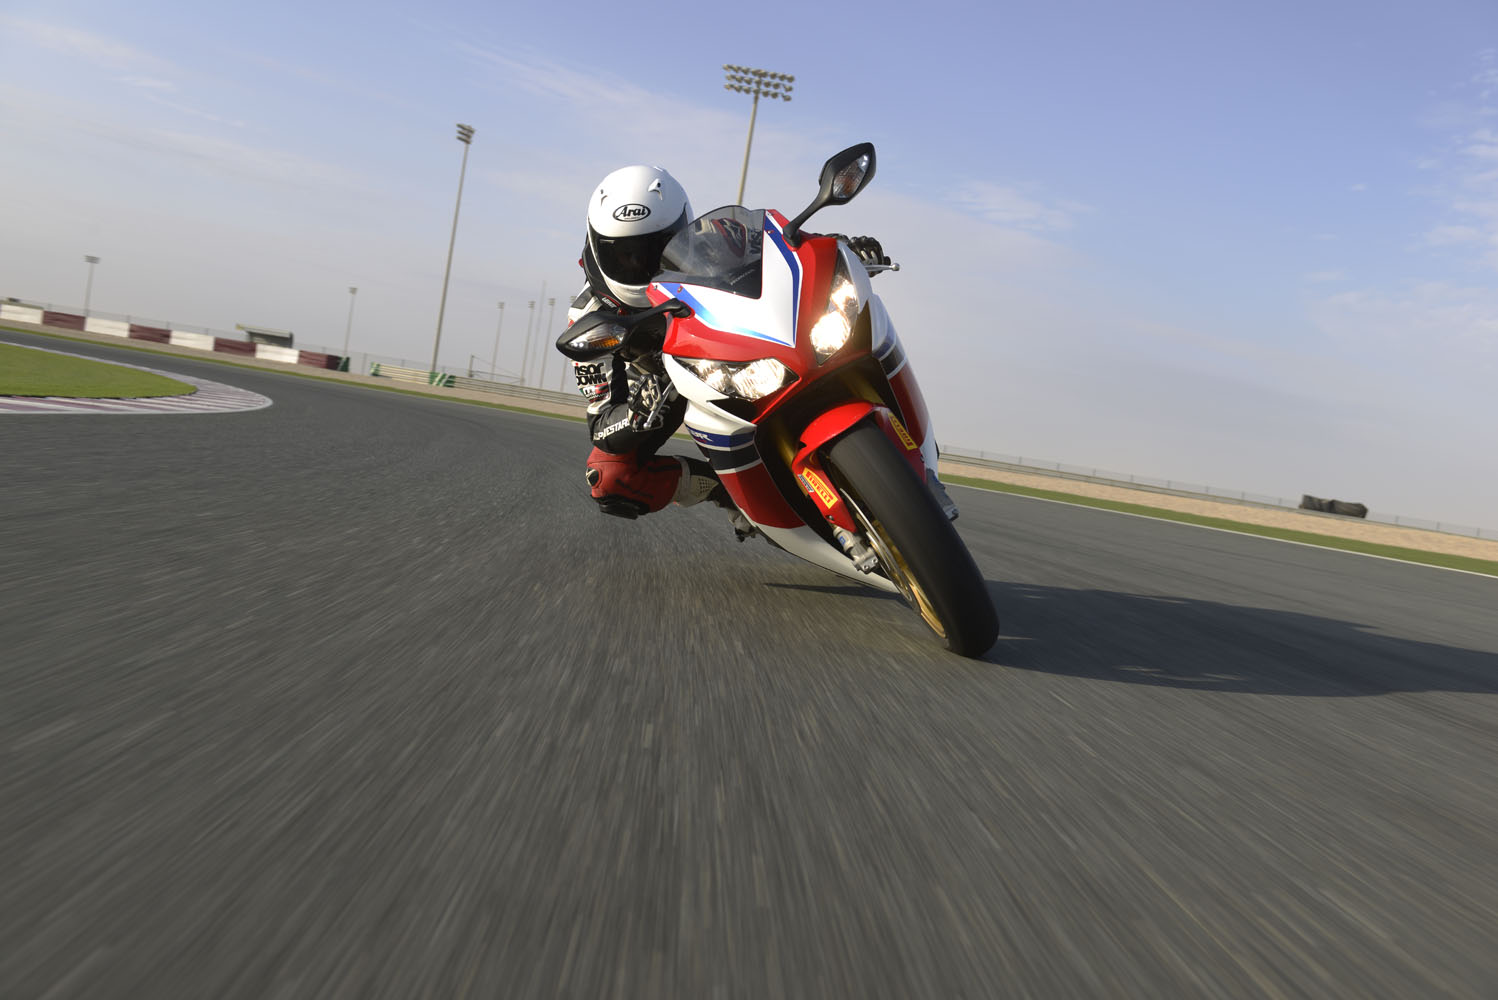 A red, white and blue 2014 Fireblade CBR1000RR-SP being ridden around a racetrack